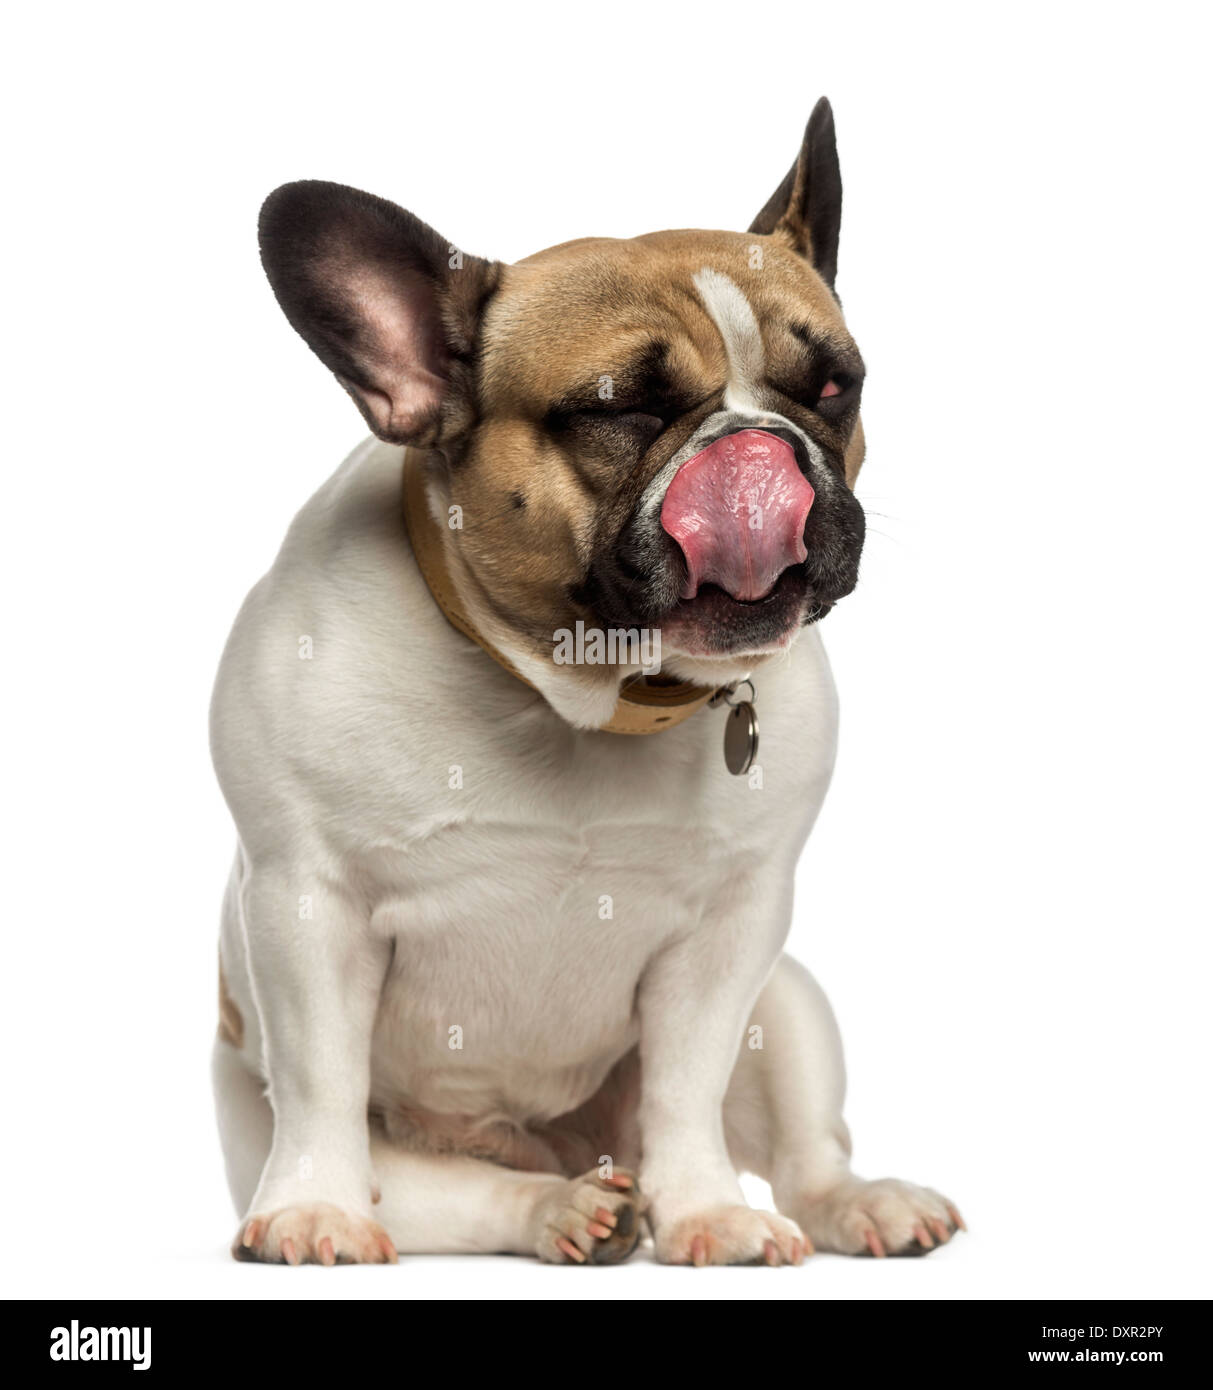 French Bulldog sitting and licking its nose against white background Stock Photo